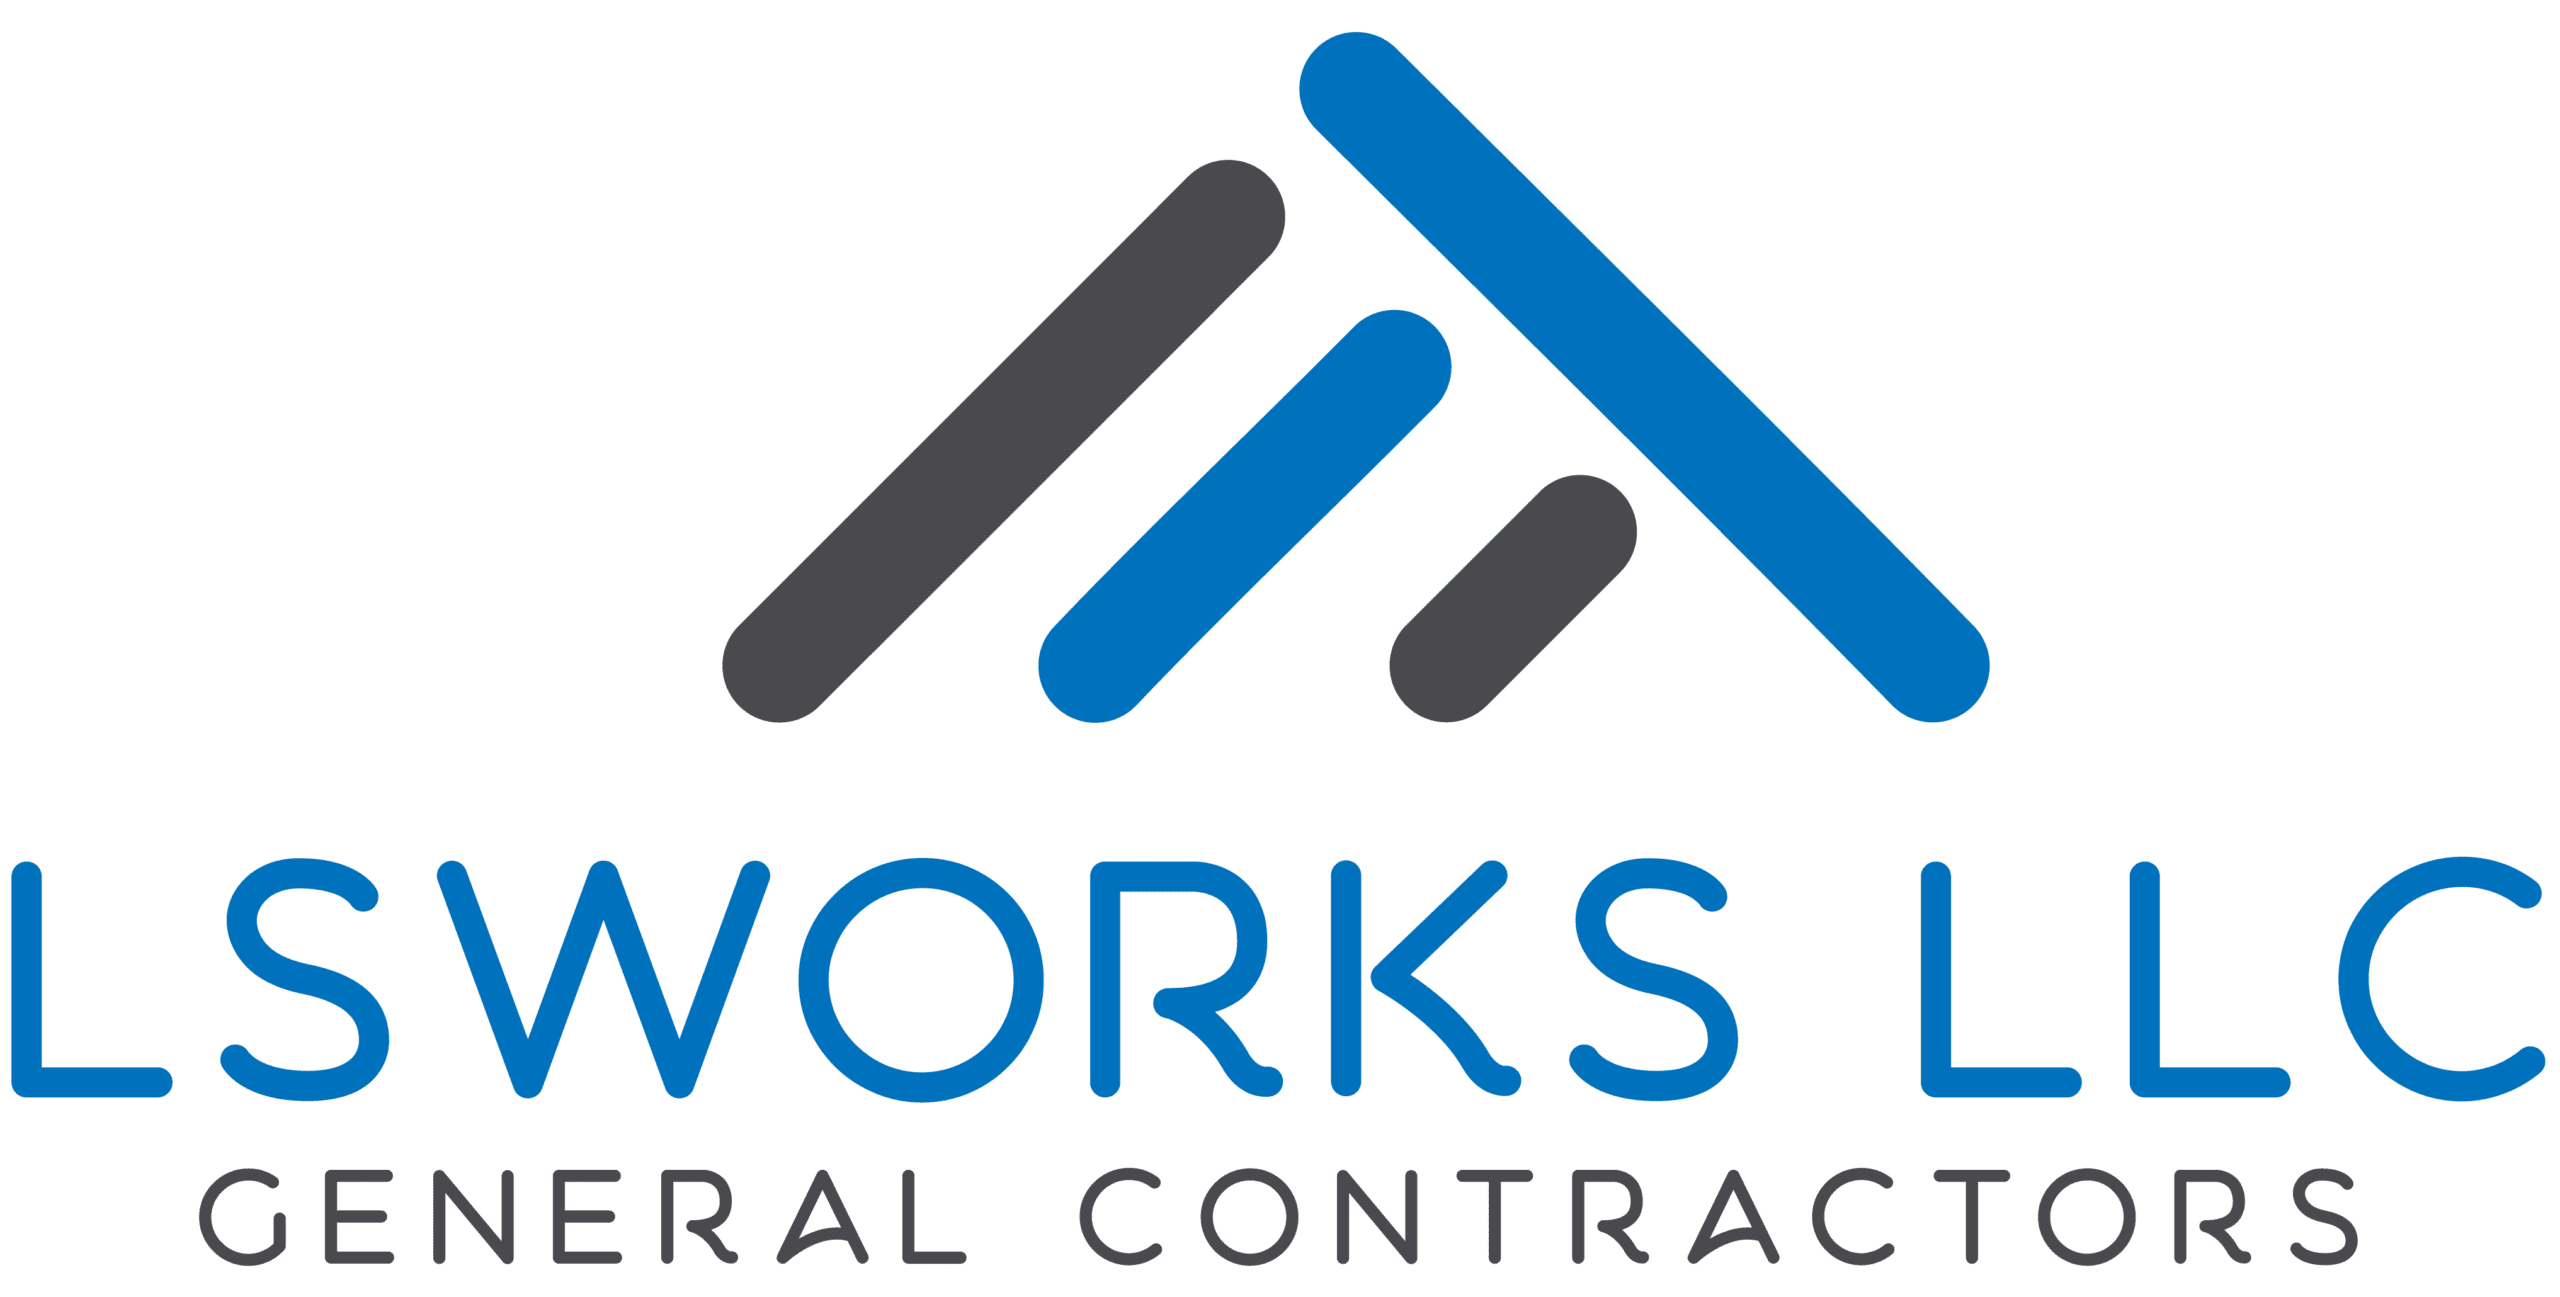 Logo of LSWorks LLC General Contractors featuring three diagonal lines in gray and blue above the company name.